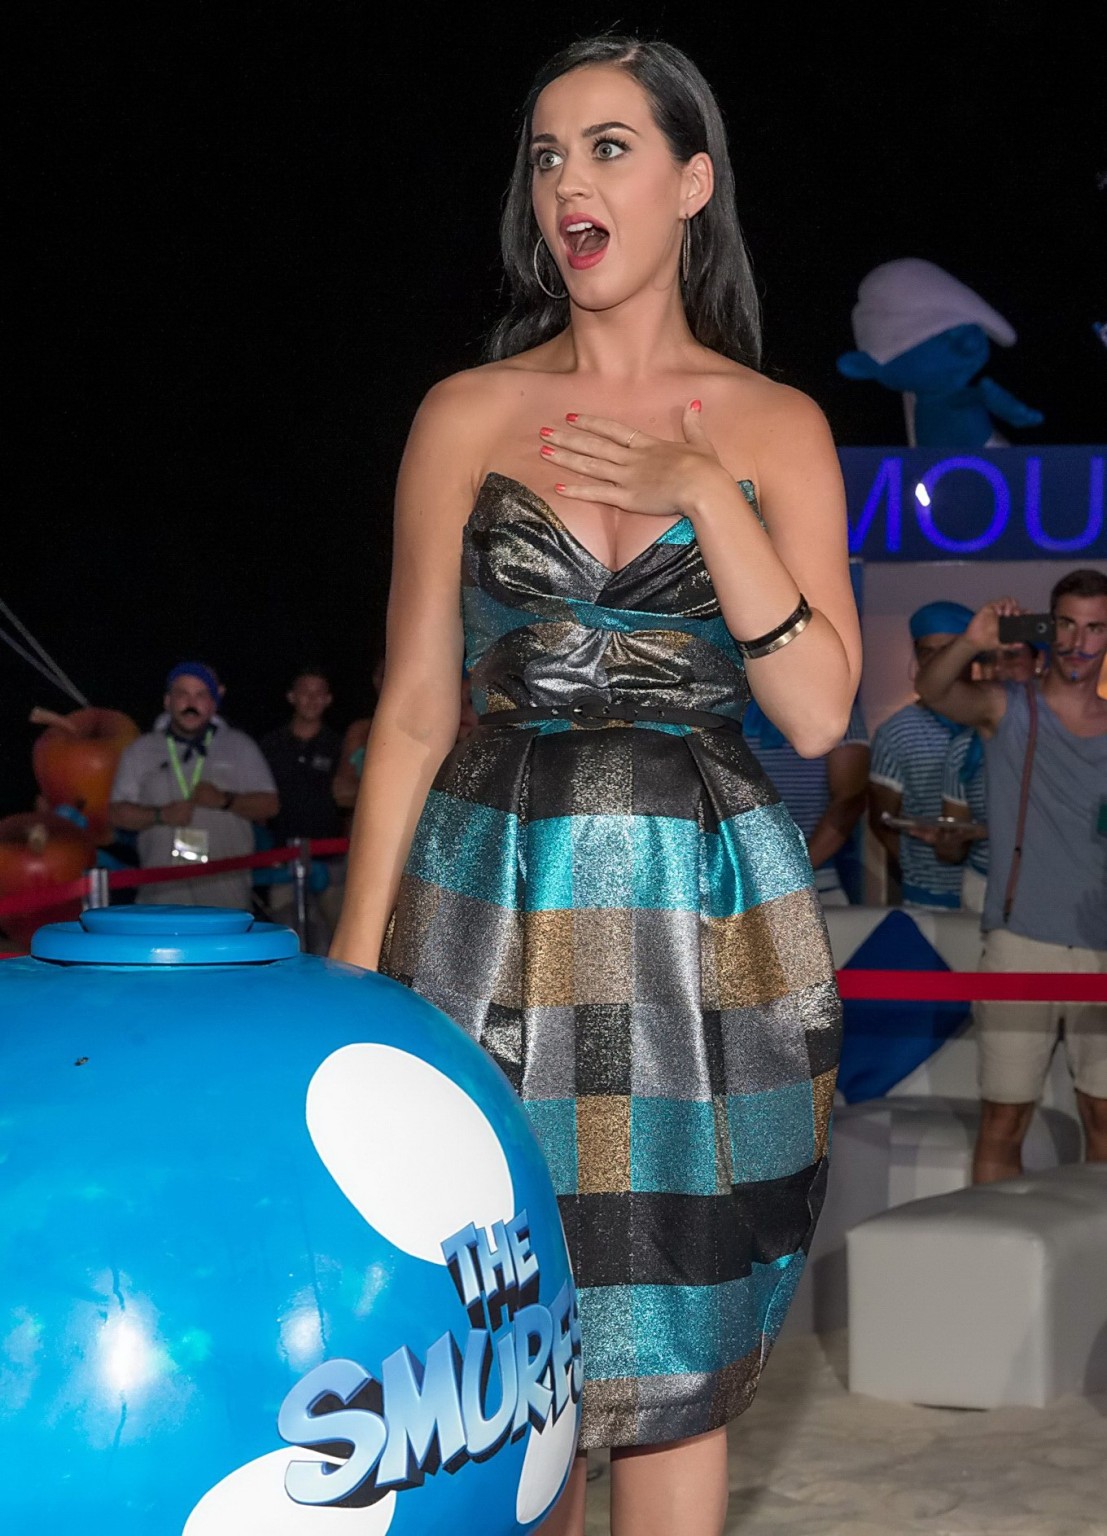 Katy Perry showing big cleavage in a hot strapless dress at The Smurfs 2 party a #75234243